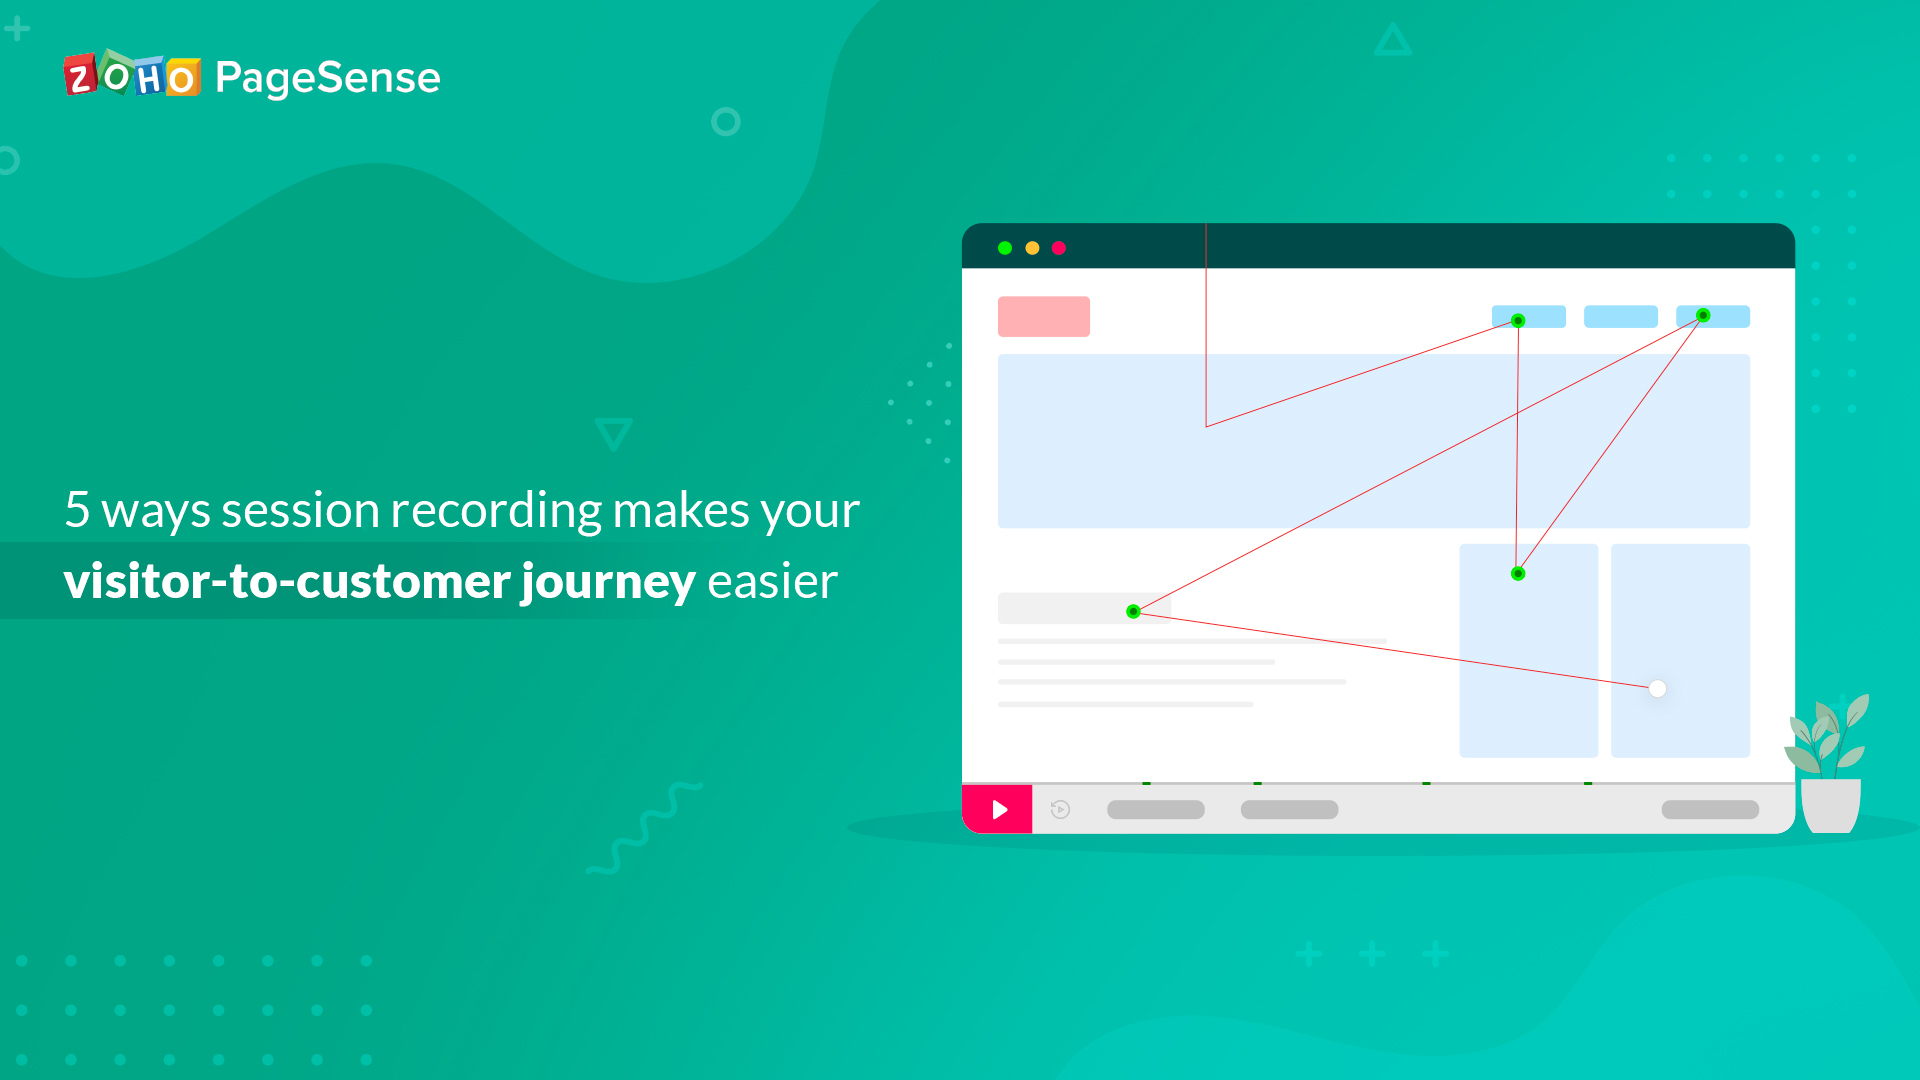 5 ways session recording makes your visitor-to-customer journey easier